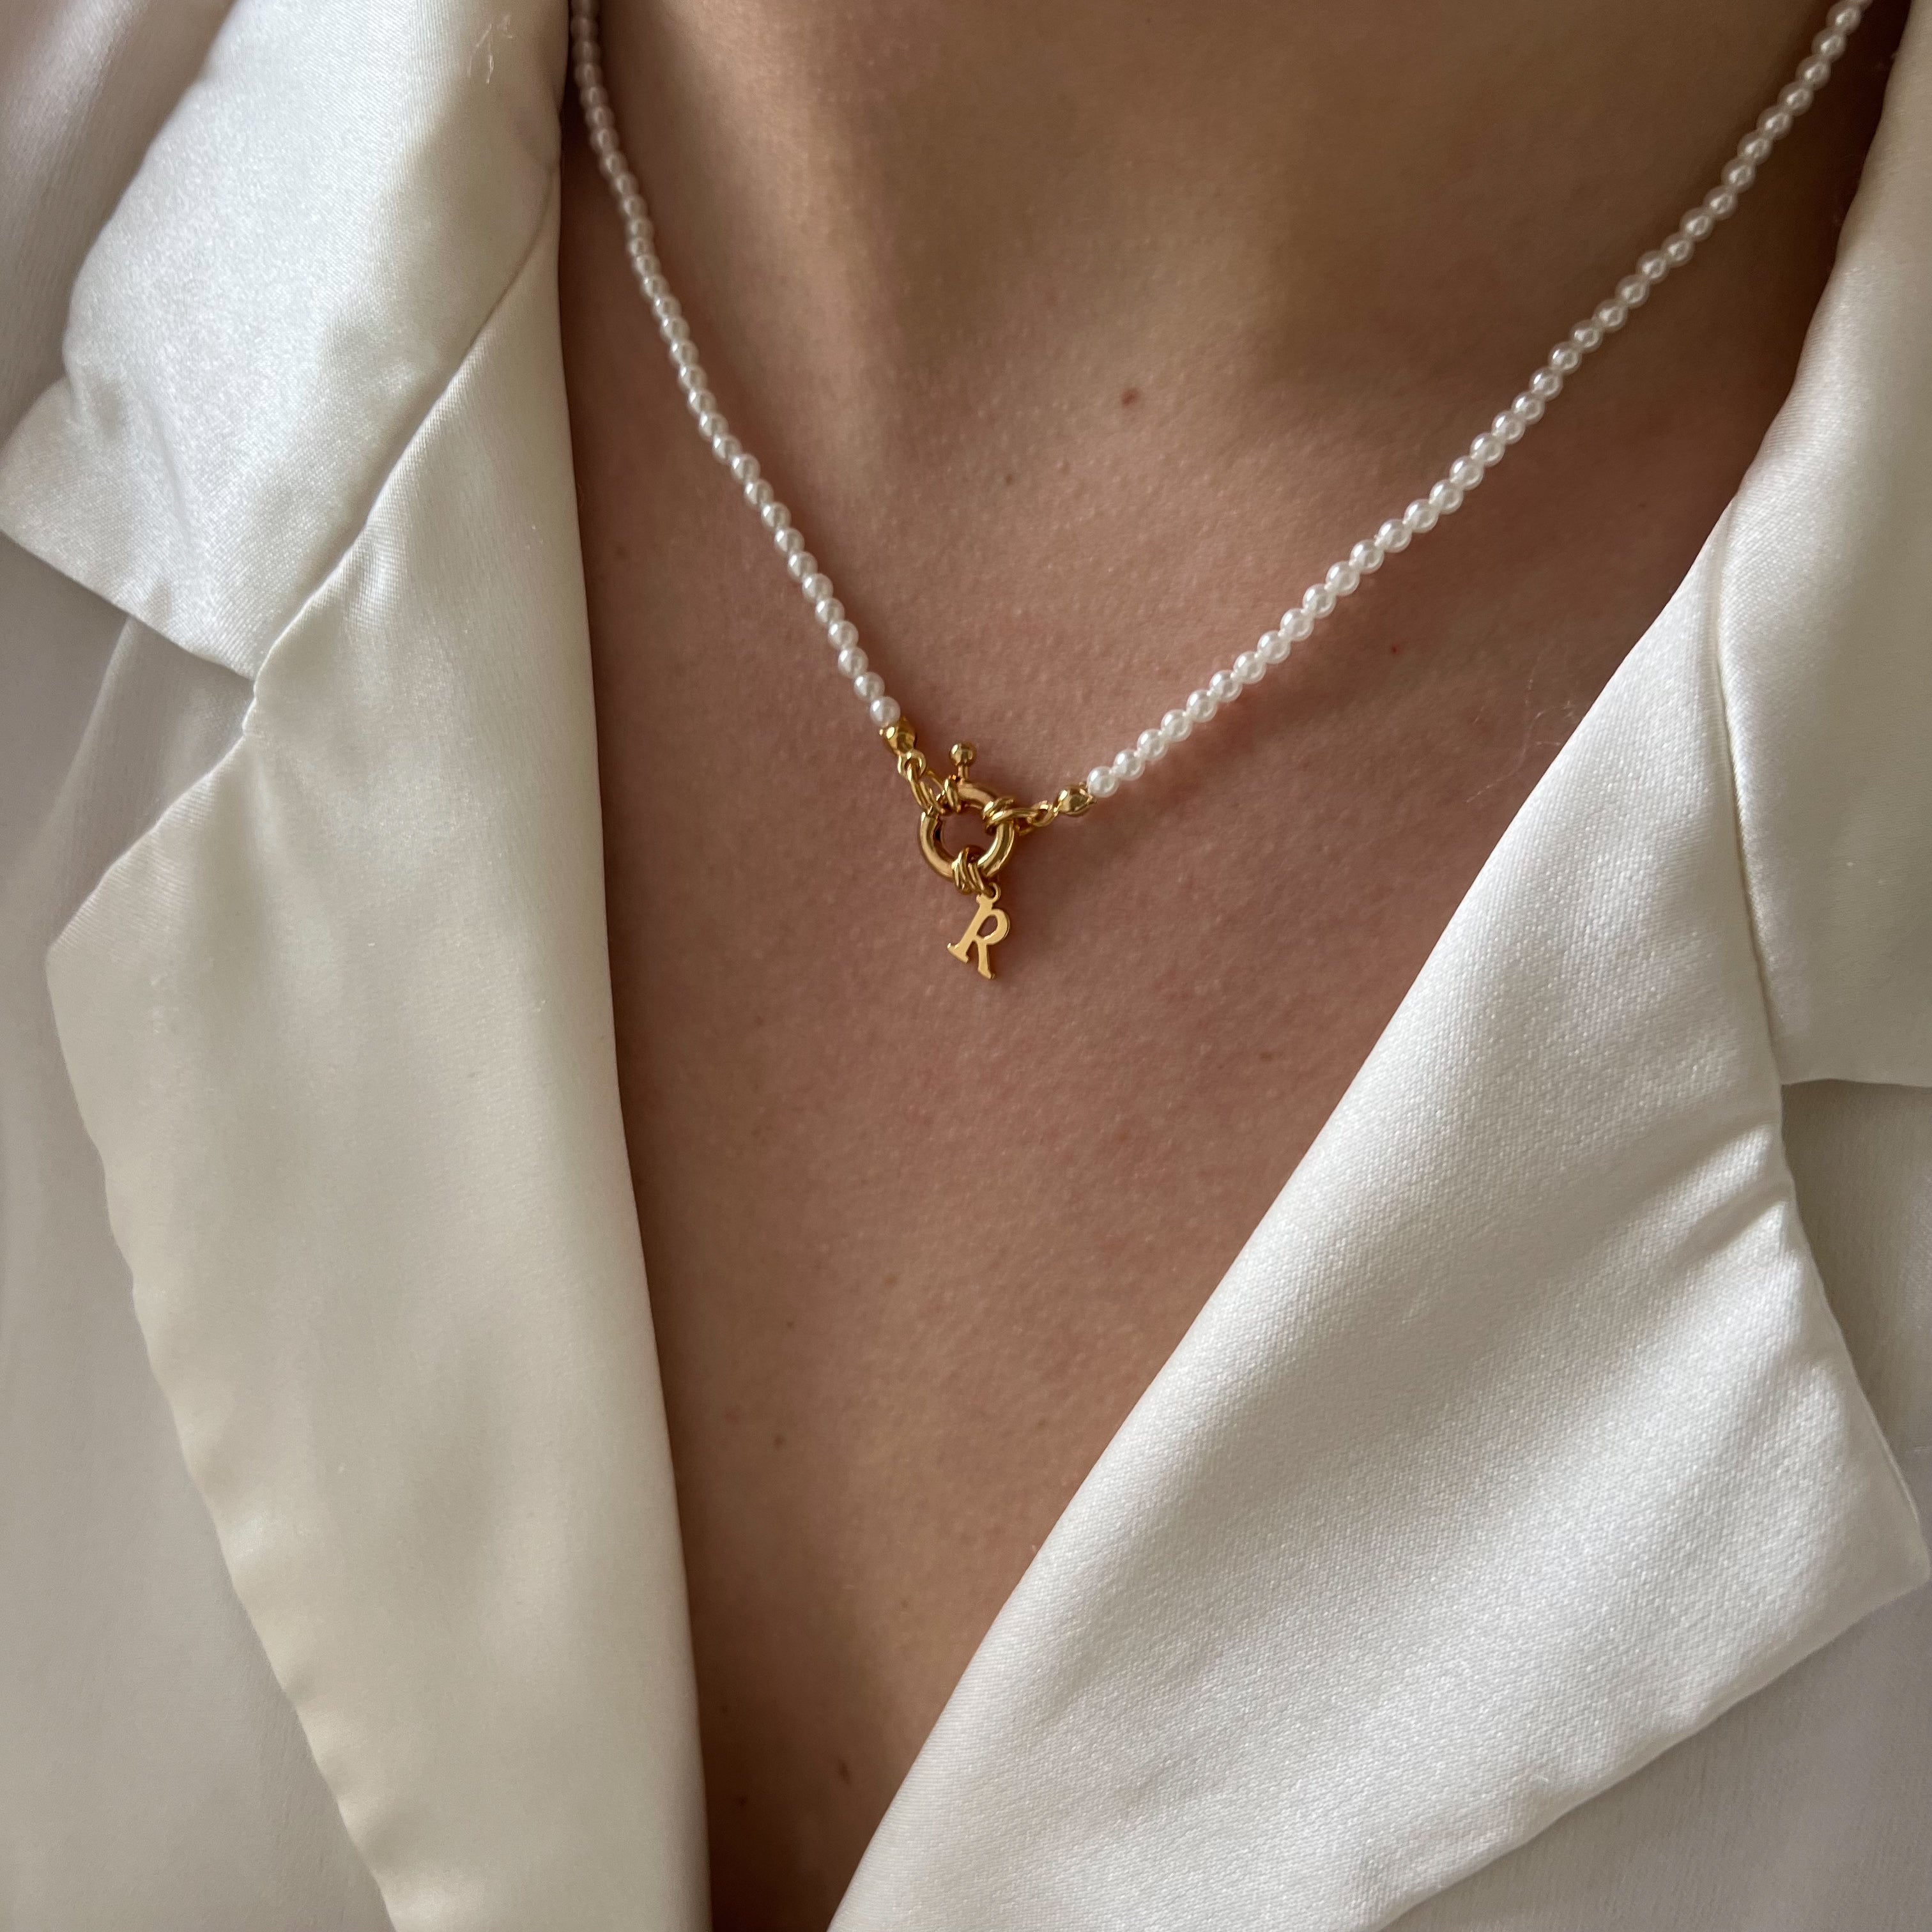 Tiny Gold Initial Necklace, Gold Letter Necklace, Gold Initial Jewelry,  Bridesmaid Gift, Personalized Gold Jewelry, Custom Gold Necklace - Etsy | Initial  necklace gold, Delicate gold necklace, Personalized gold jewelry